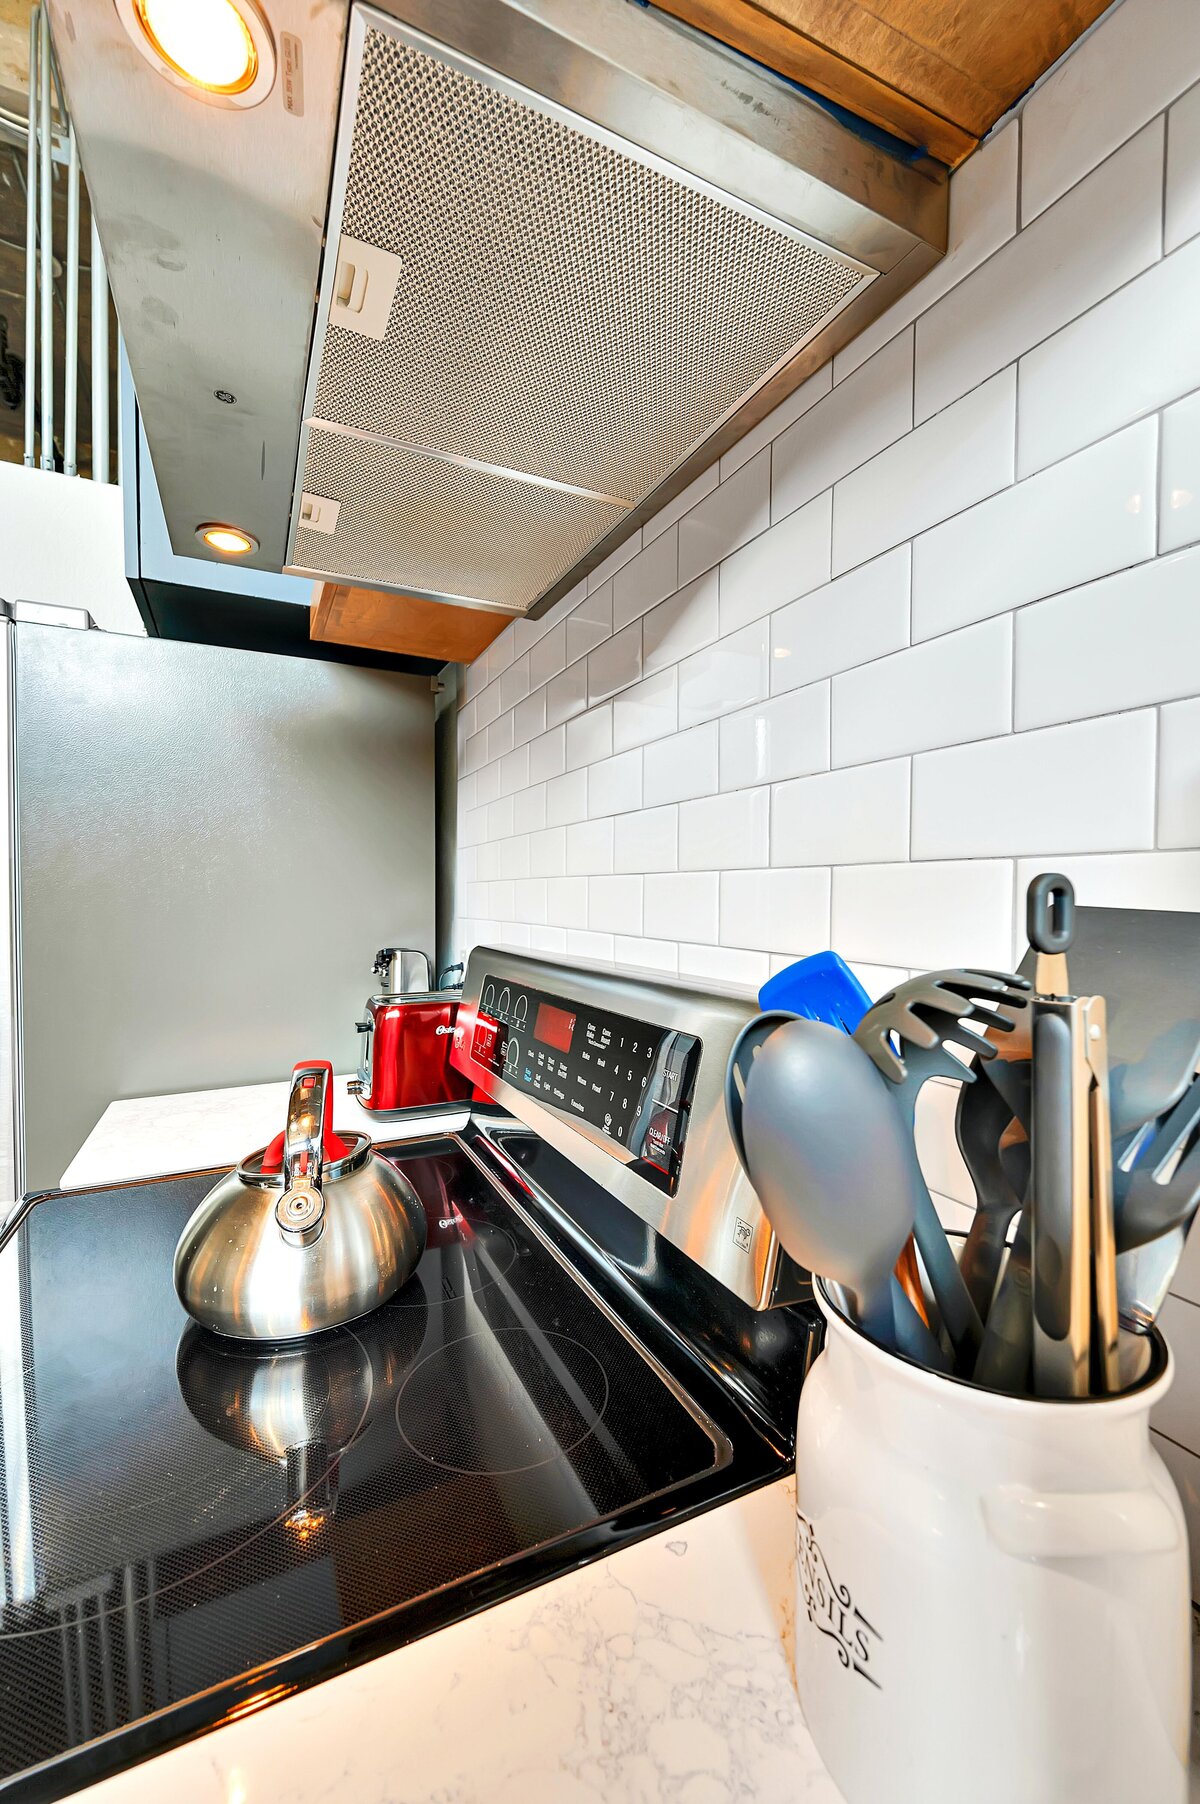 Stovetop in the kitchen of this two-bedroom, two-bathroom vacation rental condo in the historic Behrens building in the heart of the Magnolia Silo District in downtown Waco, TX.